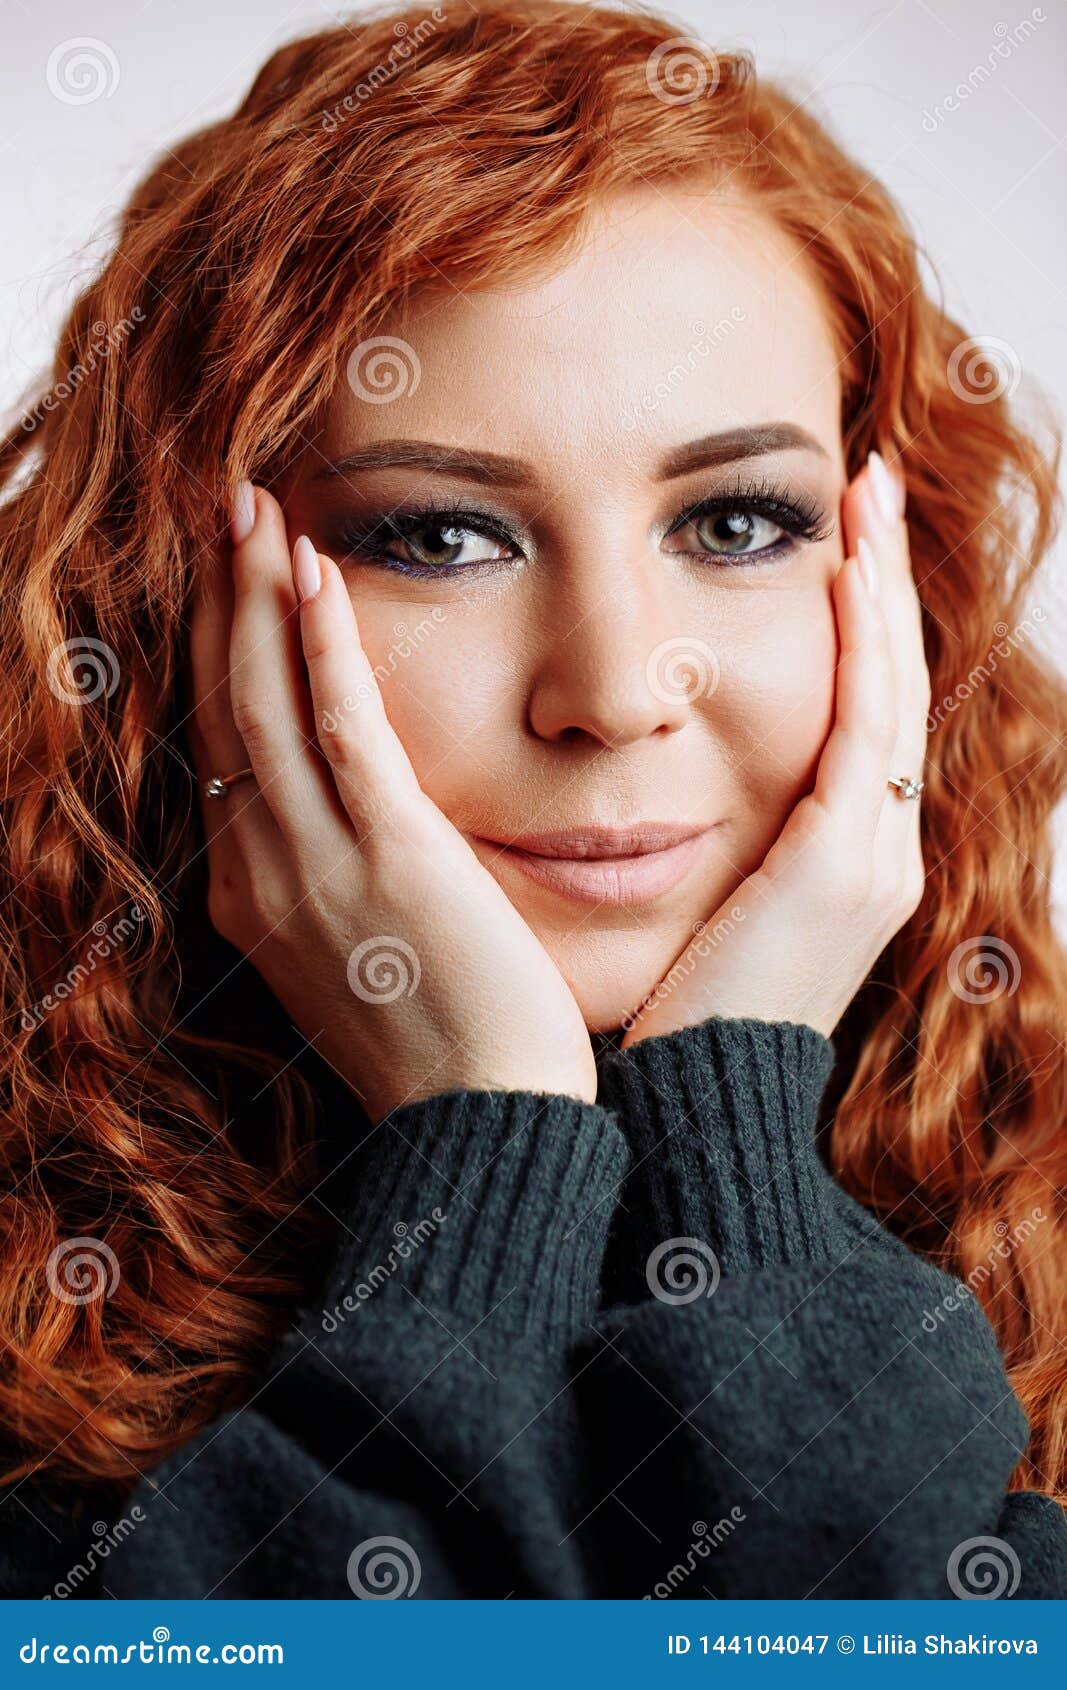 Close Up Portrait Of Young Beautiful Redhead Girl Stock Image Image Of Clean Closeup 144104047 